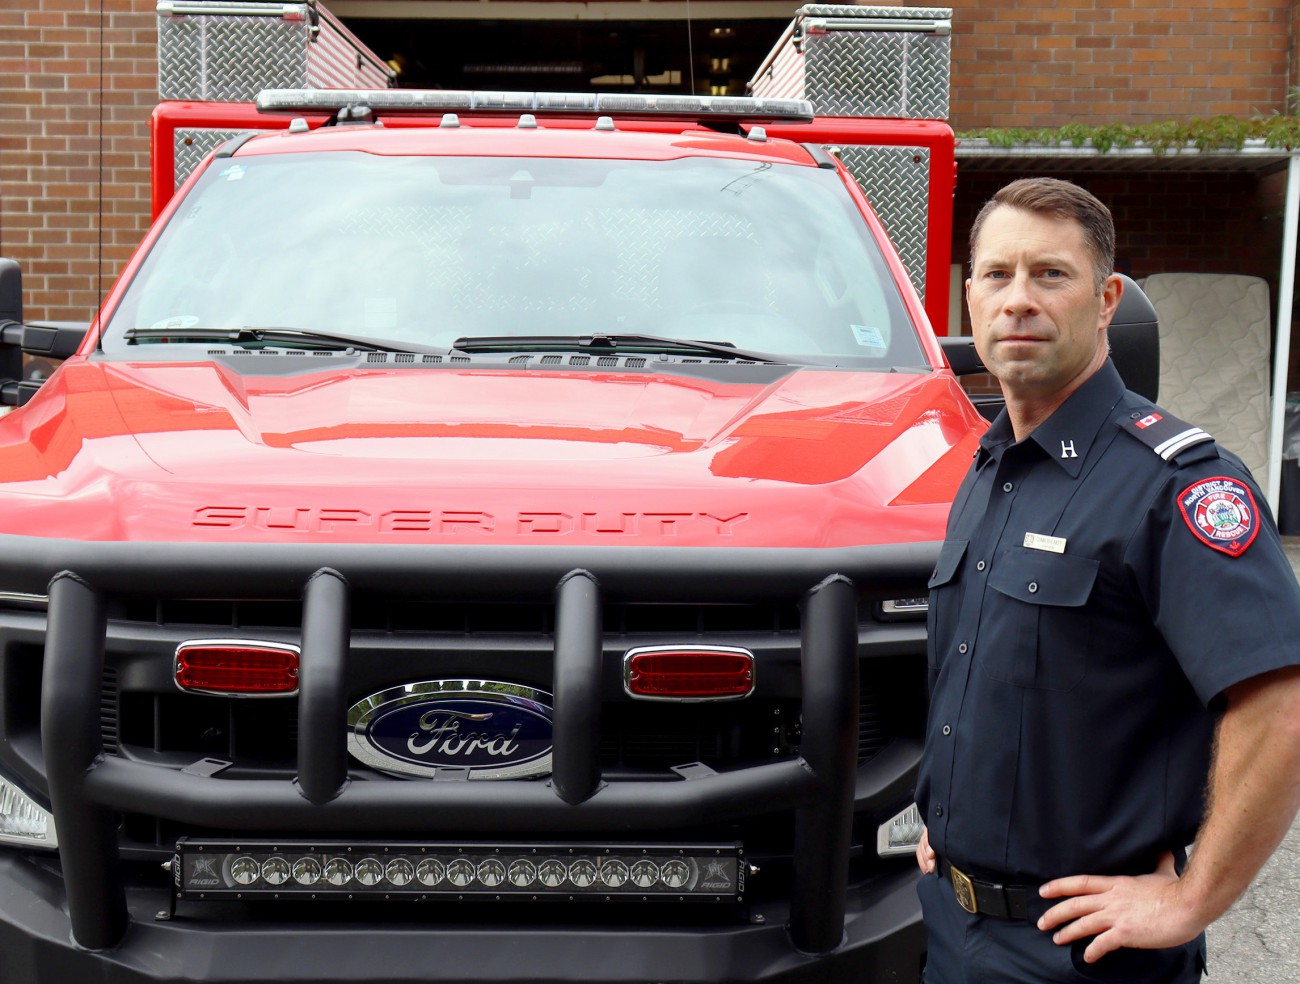 A firefighter in a blue uniform stands in front of a red pickup truck that is designed for off-road rescues and fire fighting.